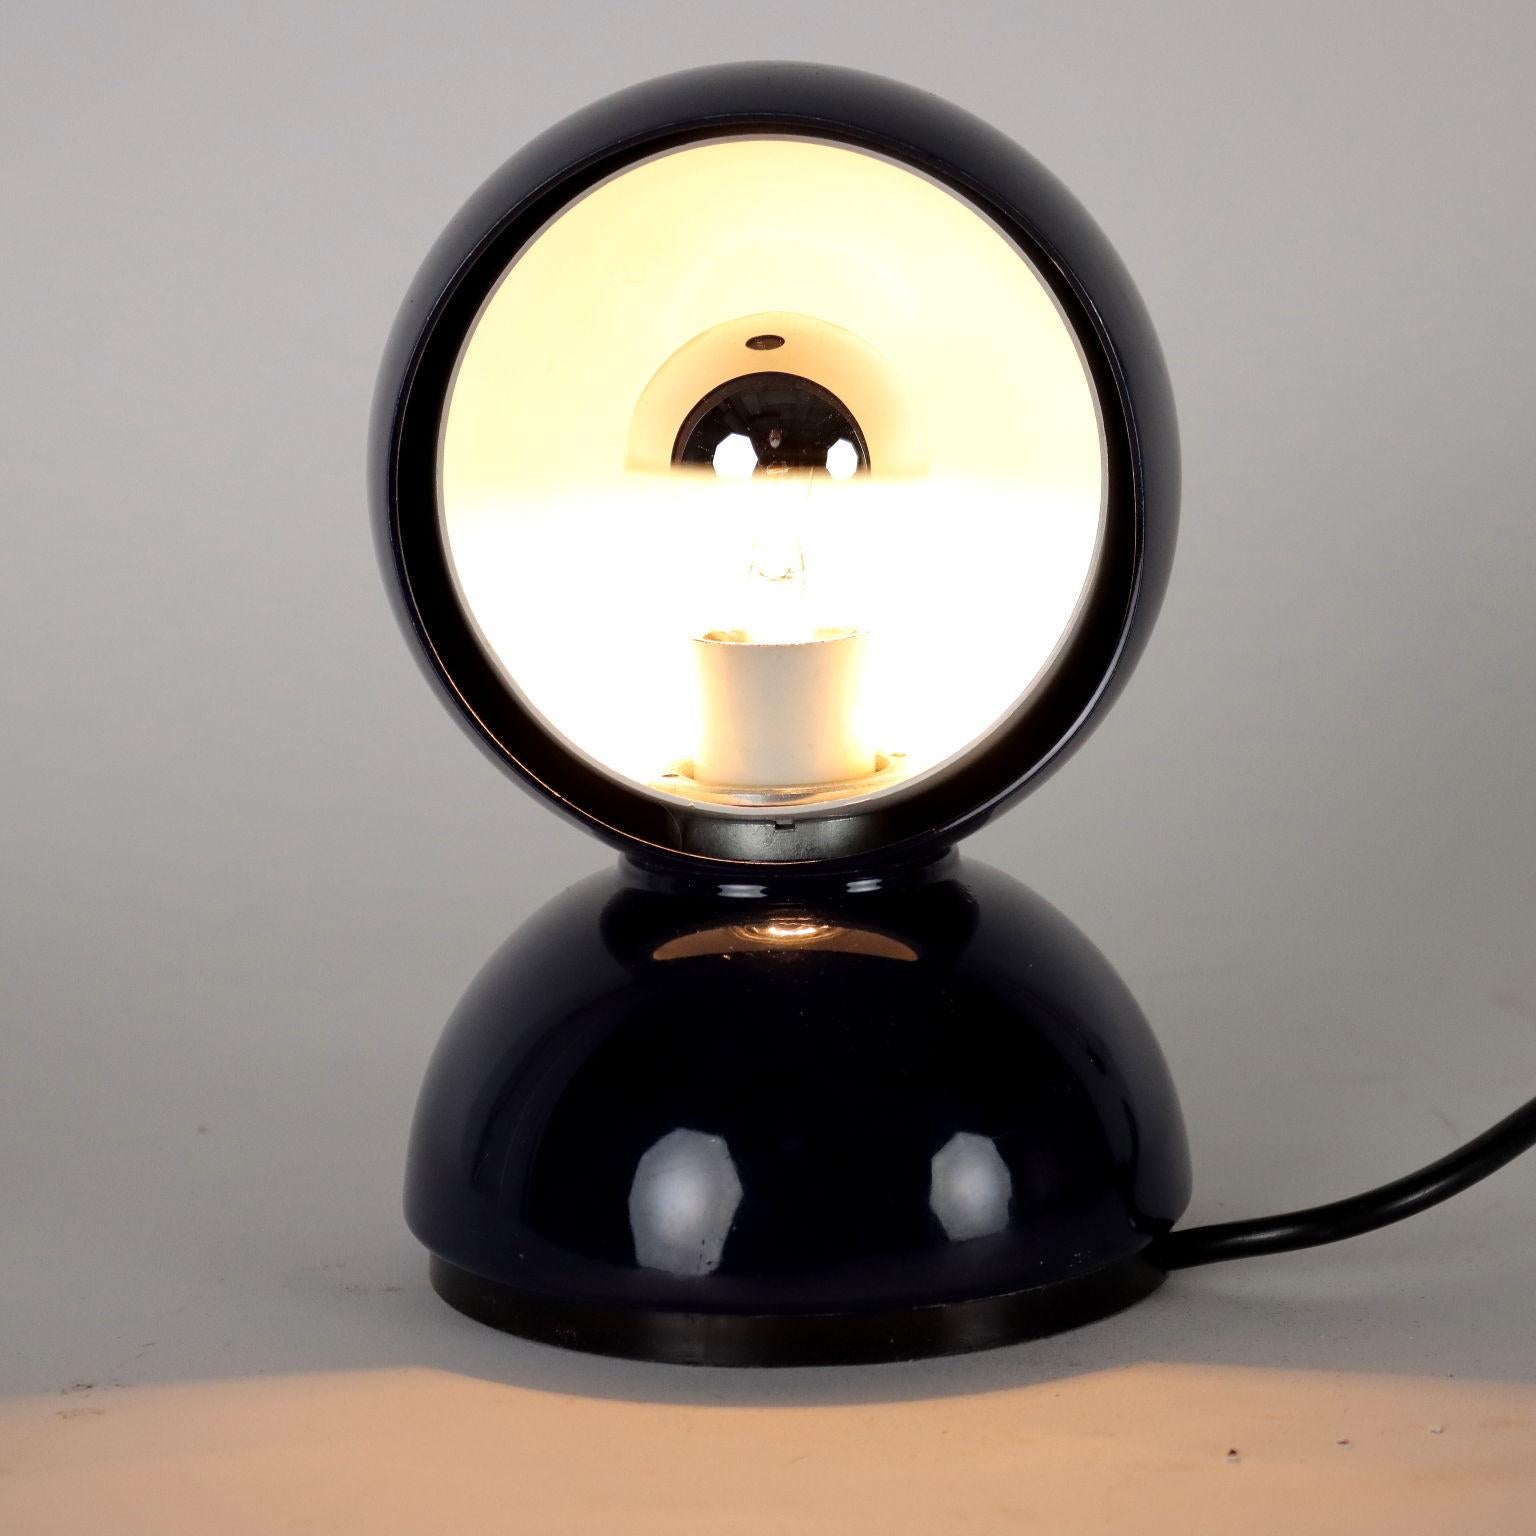 Mid-Century Modern Eclisse Lamp by Vico Magistretti for Artemide, 1960s-70s